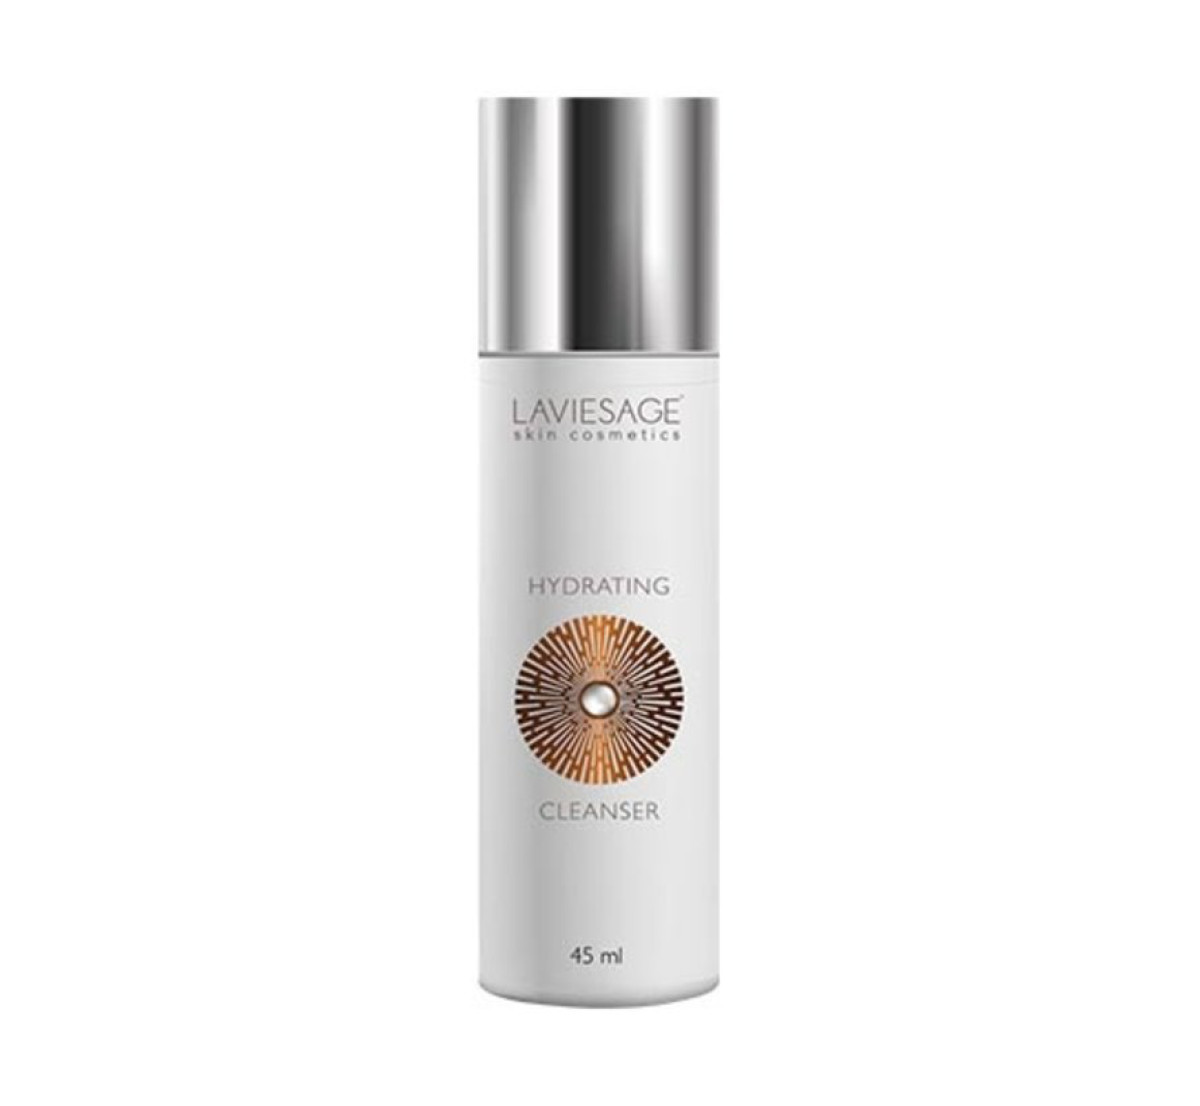 Laviesage Hydrating Cleanser 45ml